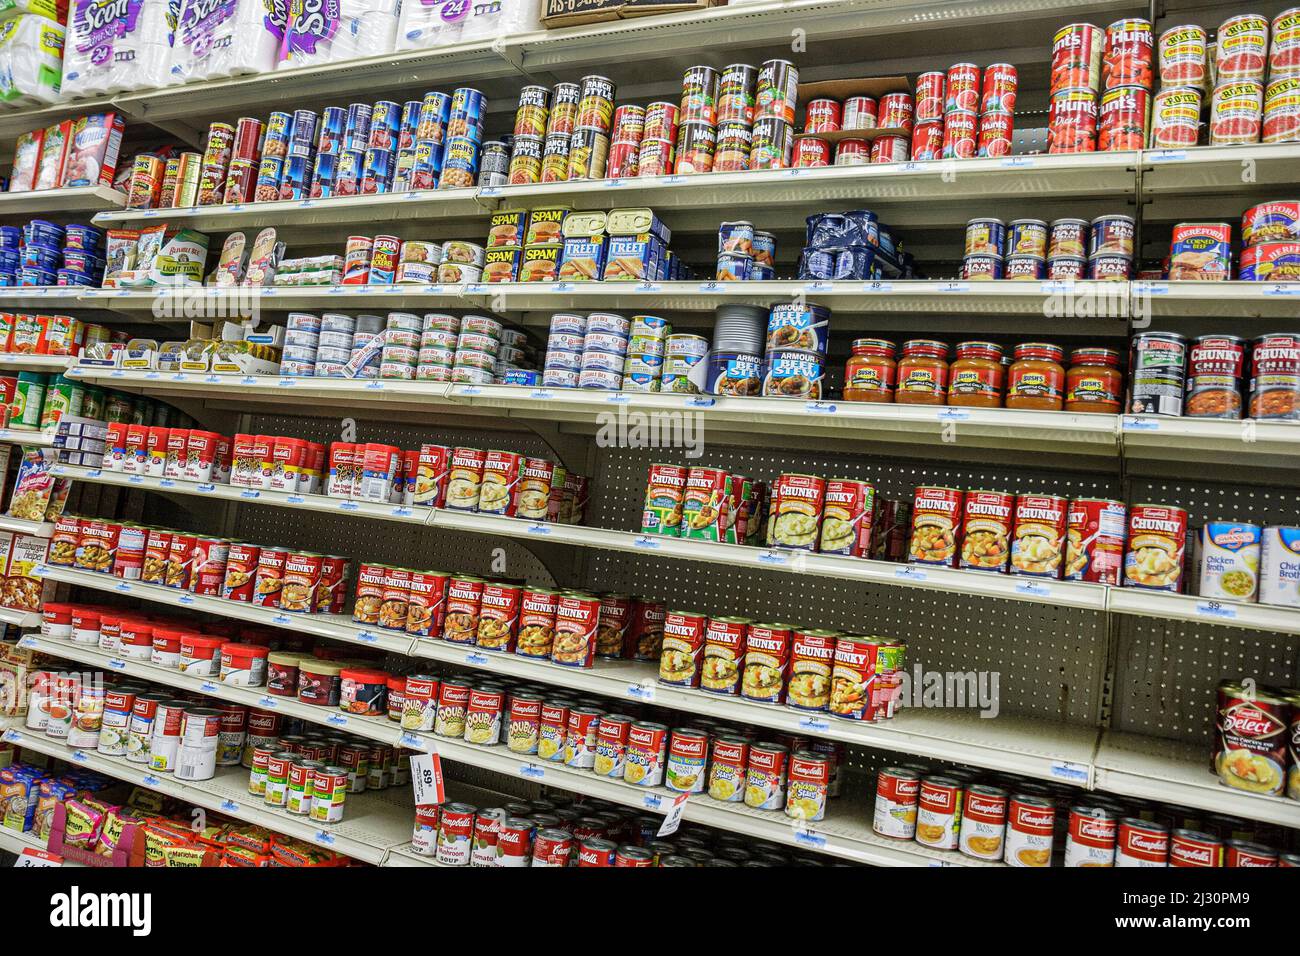 Miami Florida,Kmart inside interior aisle canned goods food soups meat,shelves shelving display sale prices Stock Photo